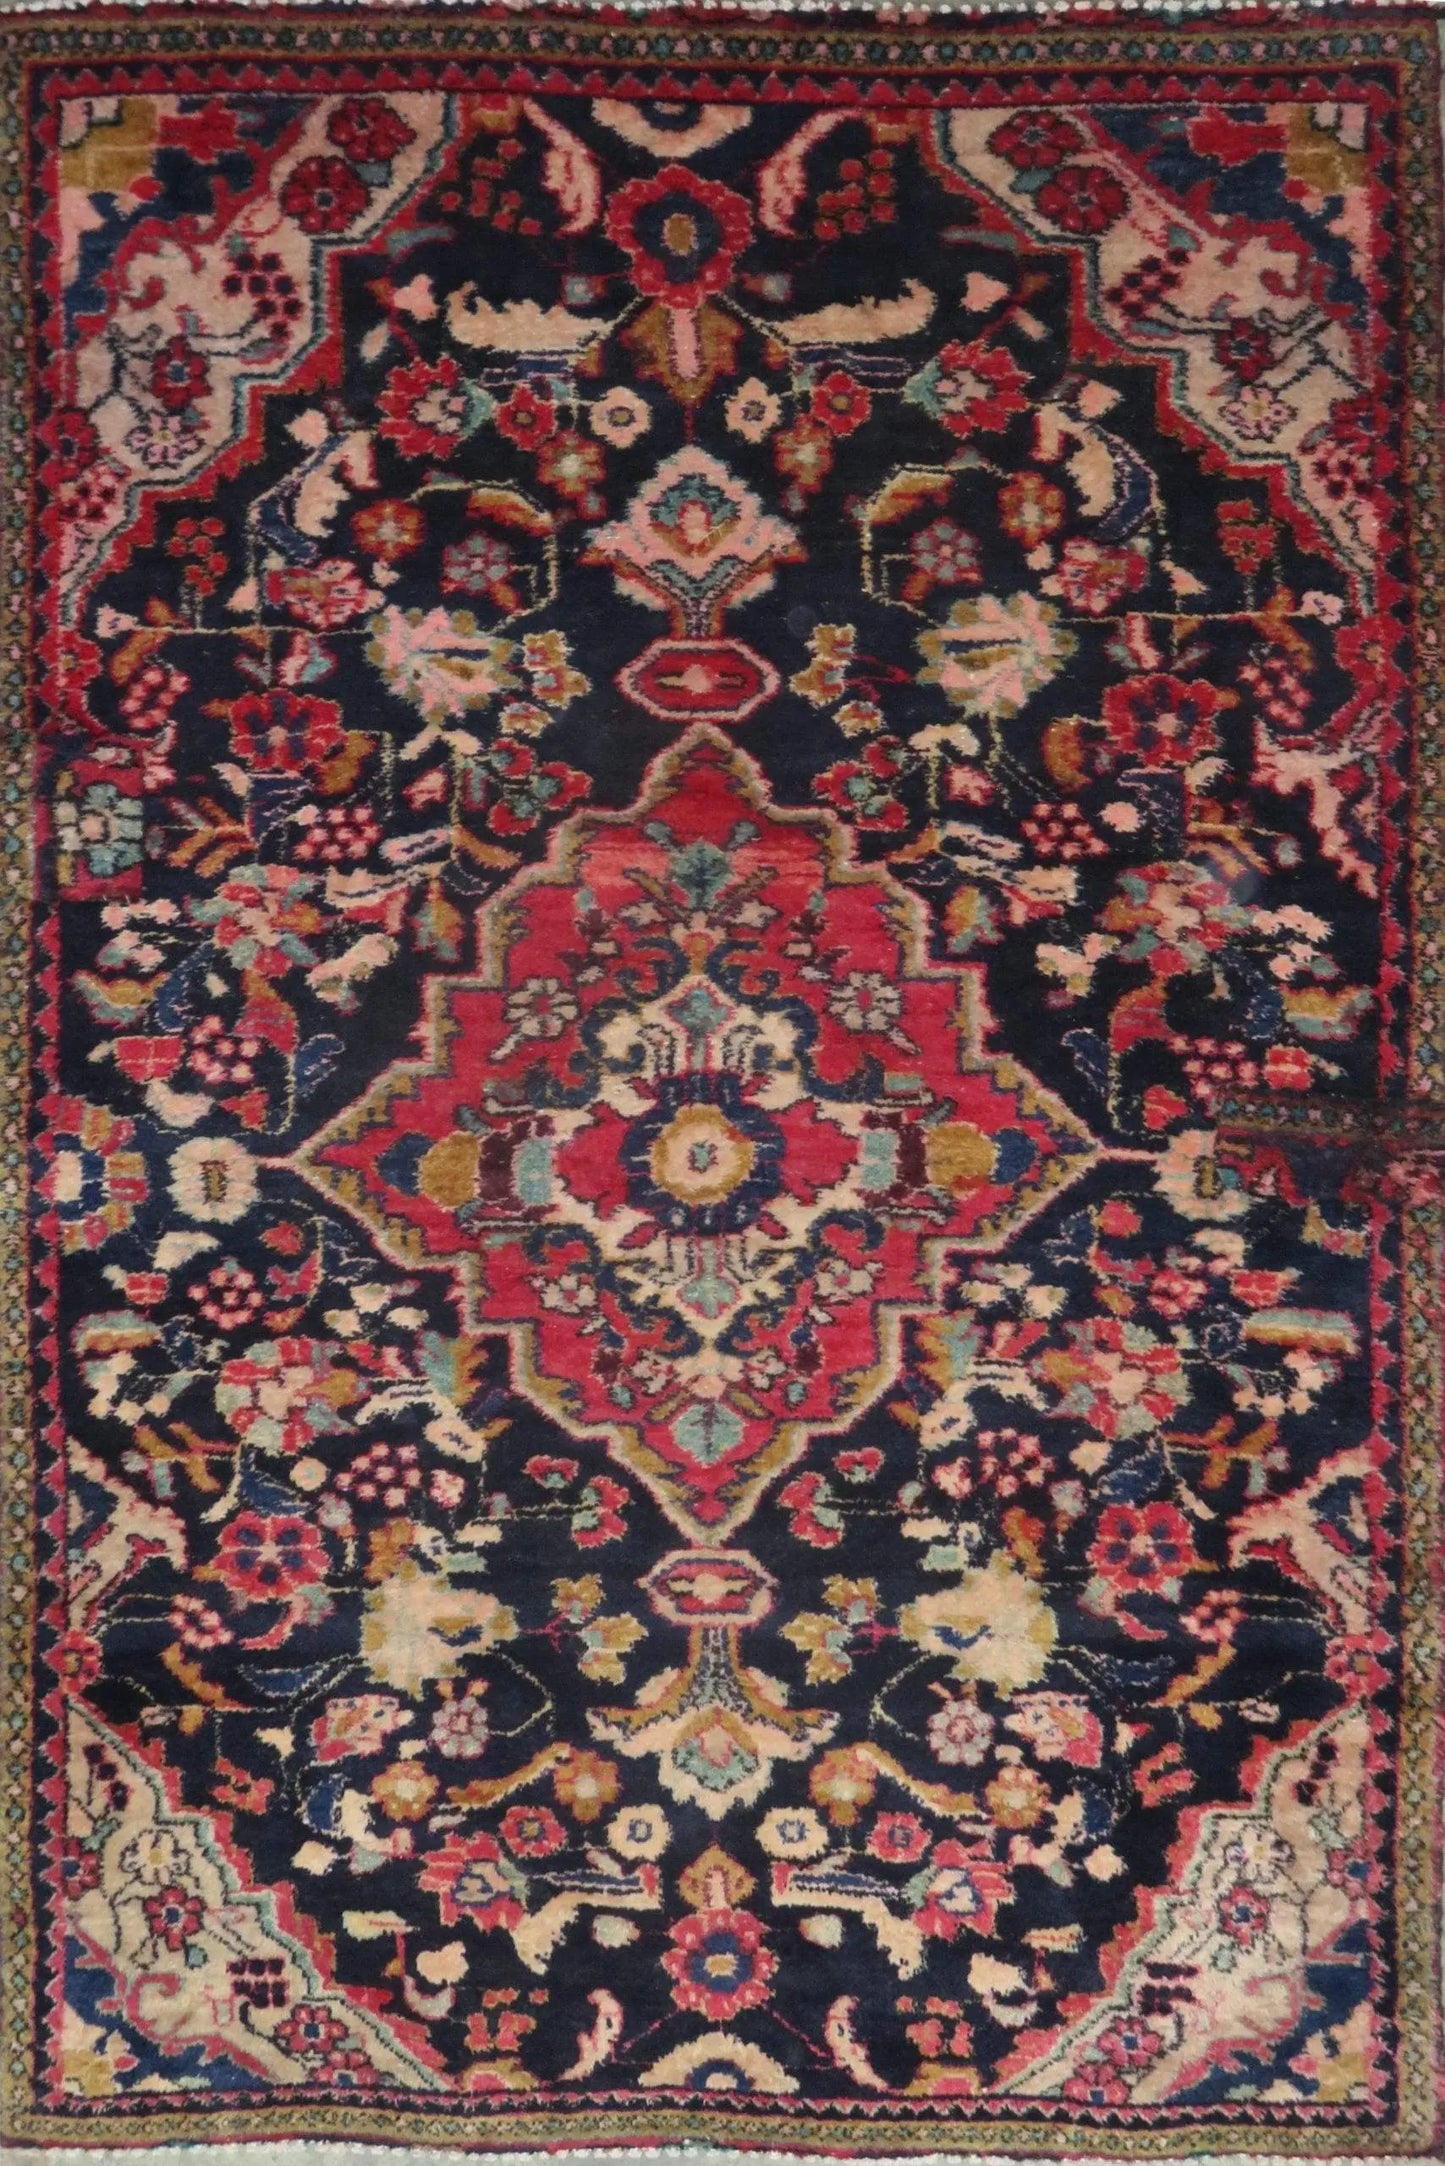 Hand-Knotted Persian Wool Rug _ Luxurious Vintage Design, 5'10" x 4'1", Artisan Crafted